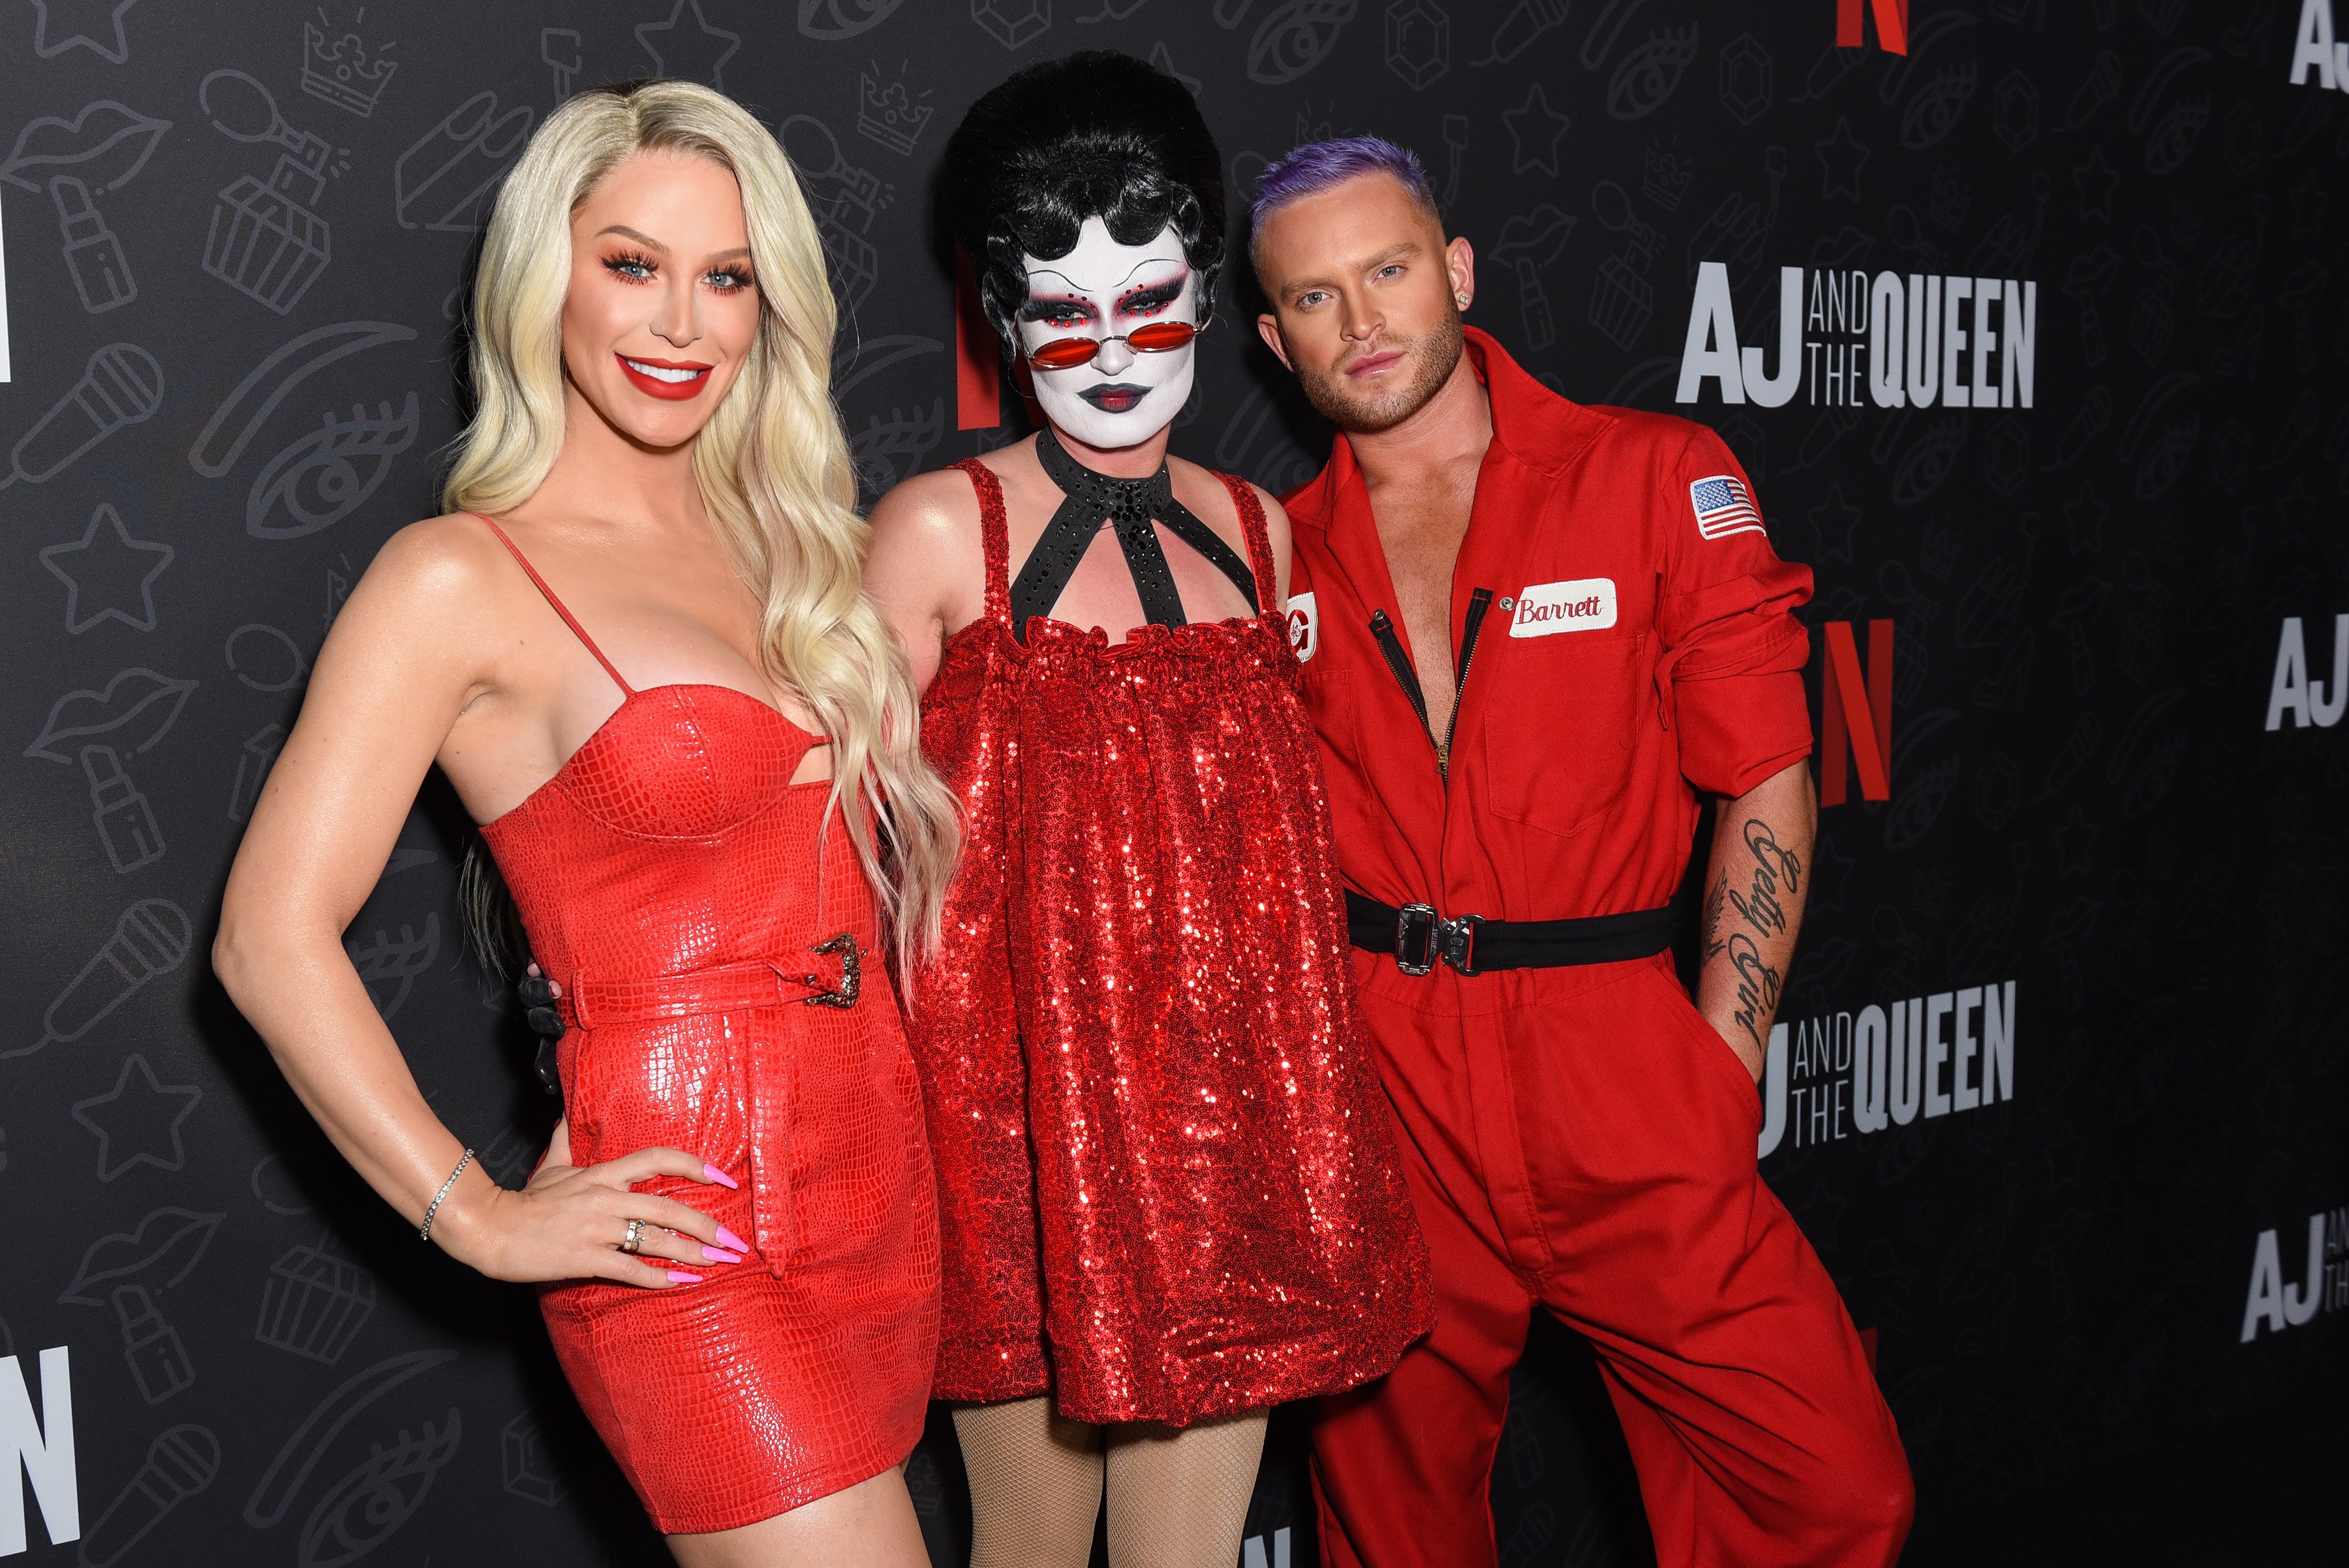 Gigi Gorgeous, August Getty, and Gotmik attend premiere of Netflix's 'AJ And The Queen'